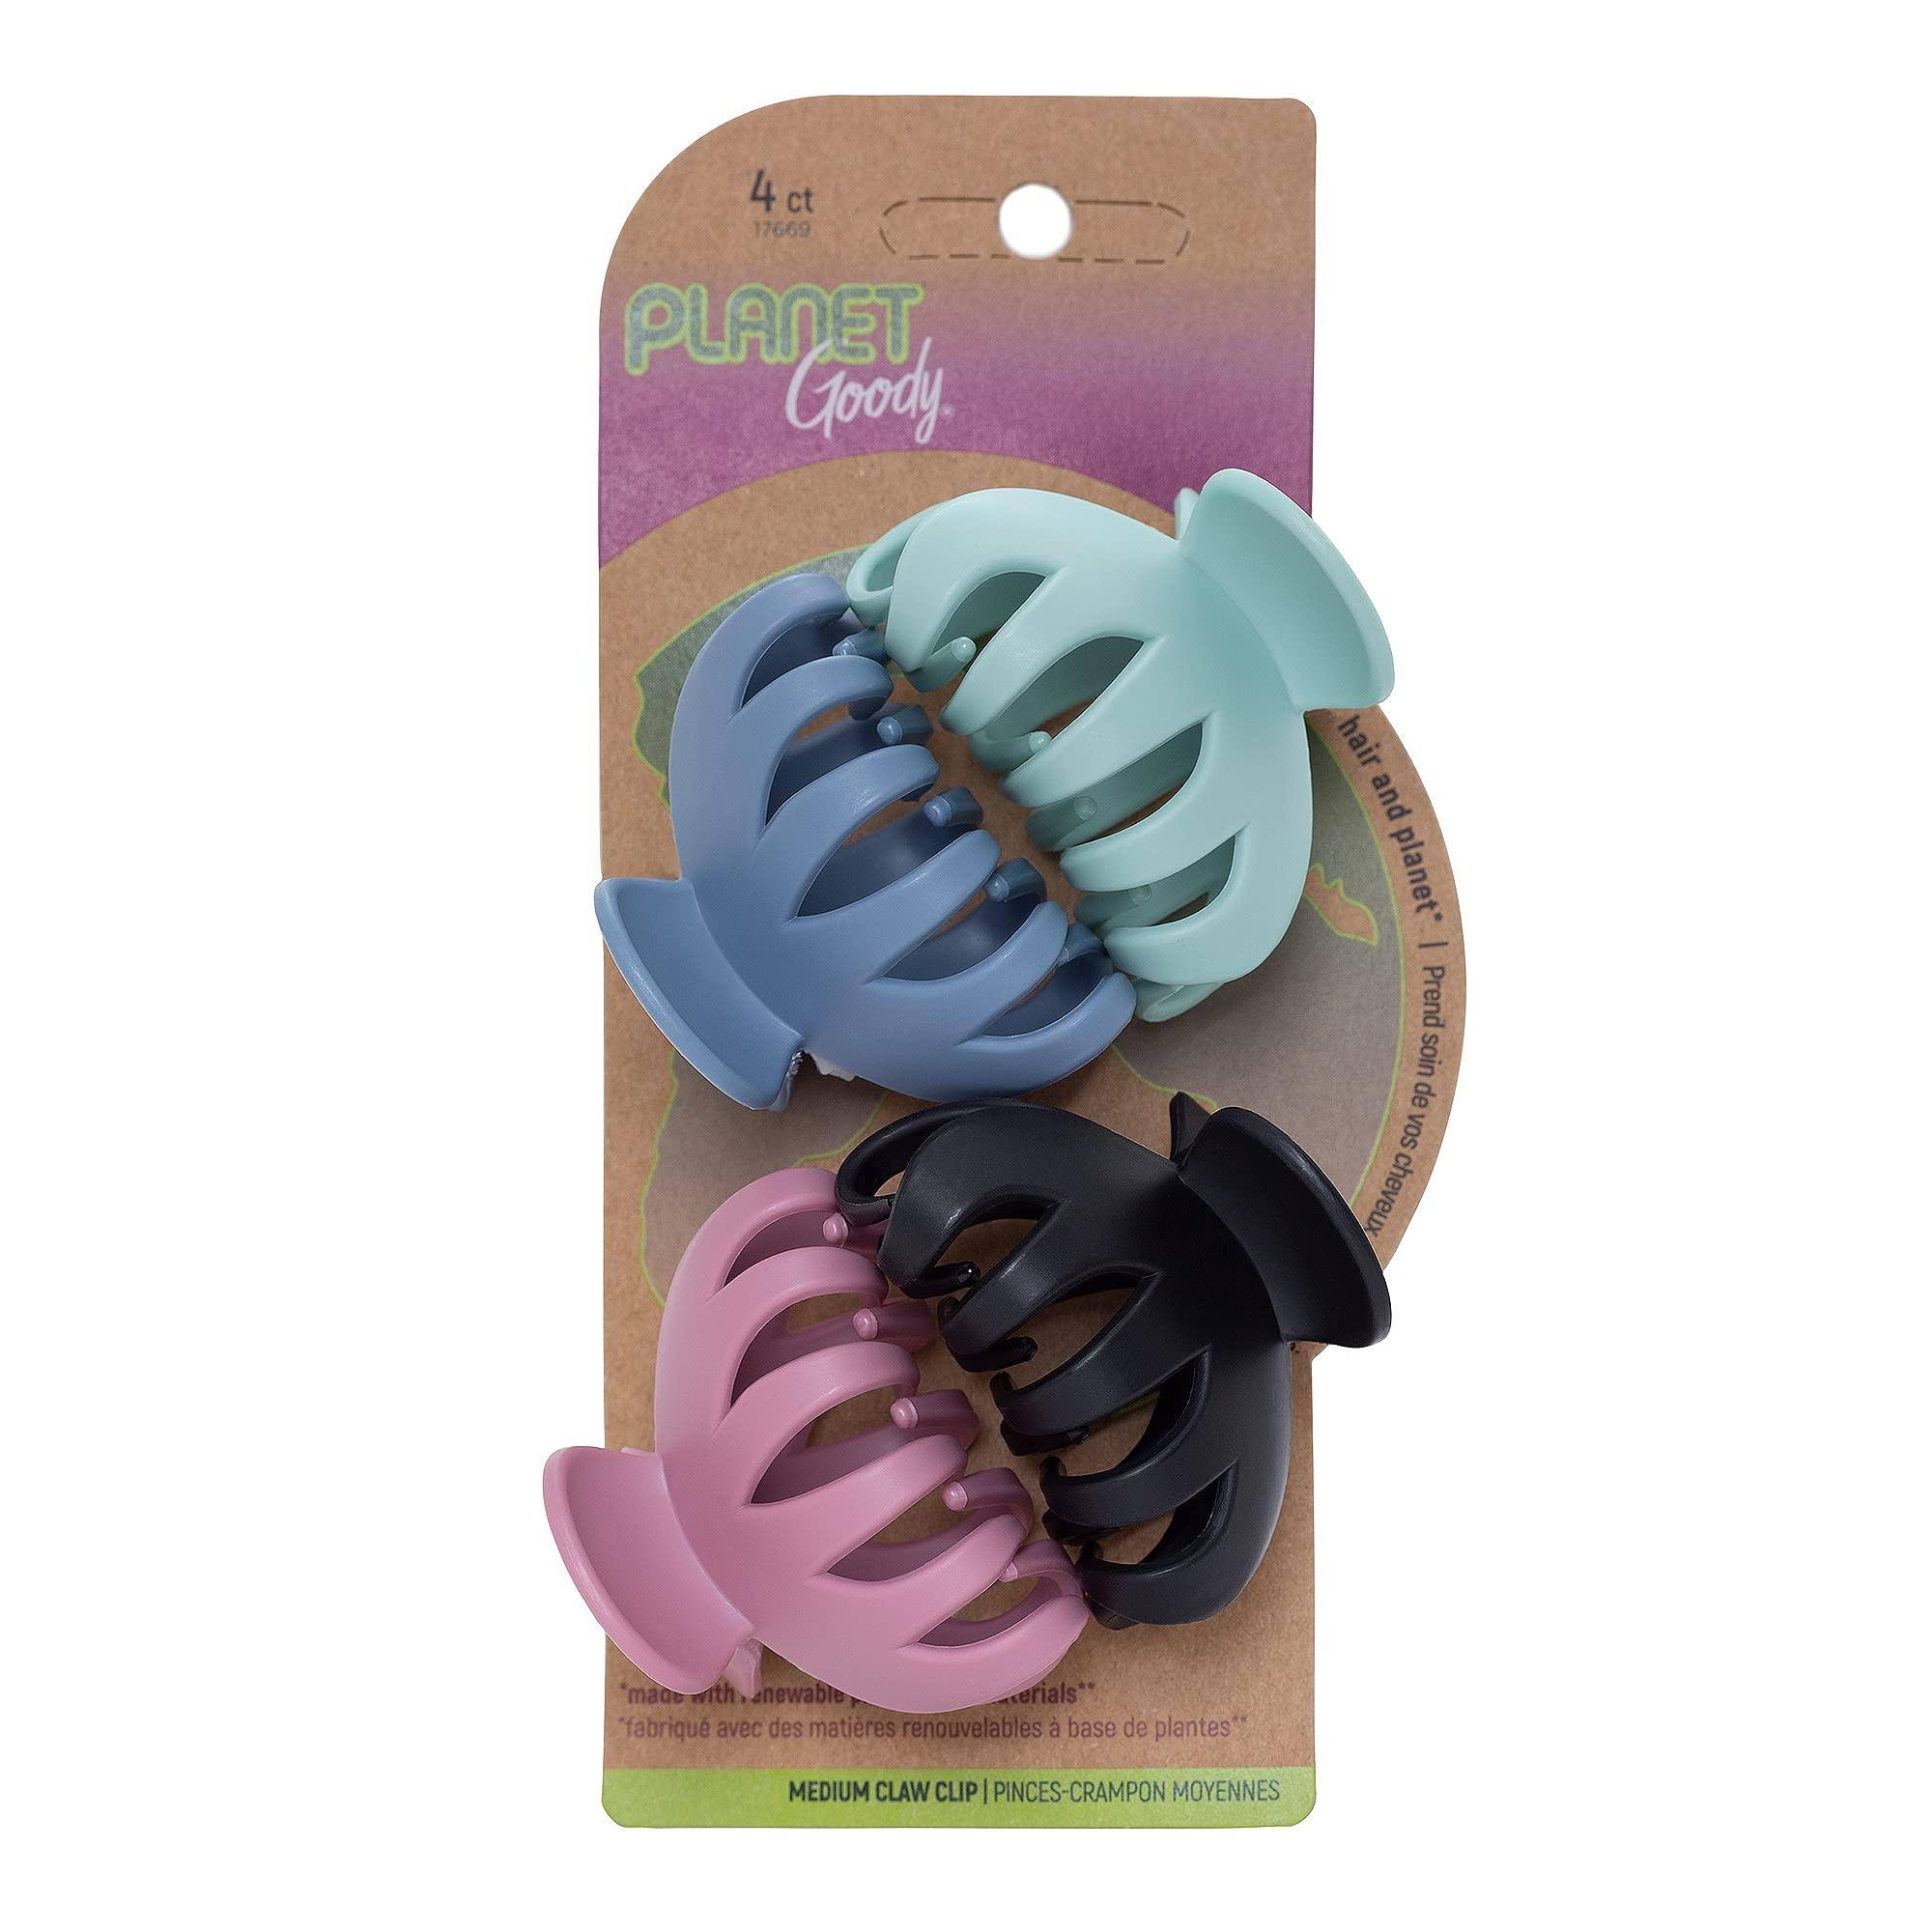 Planet Goody Spider Claw Clips, 4 Ct